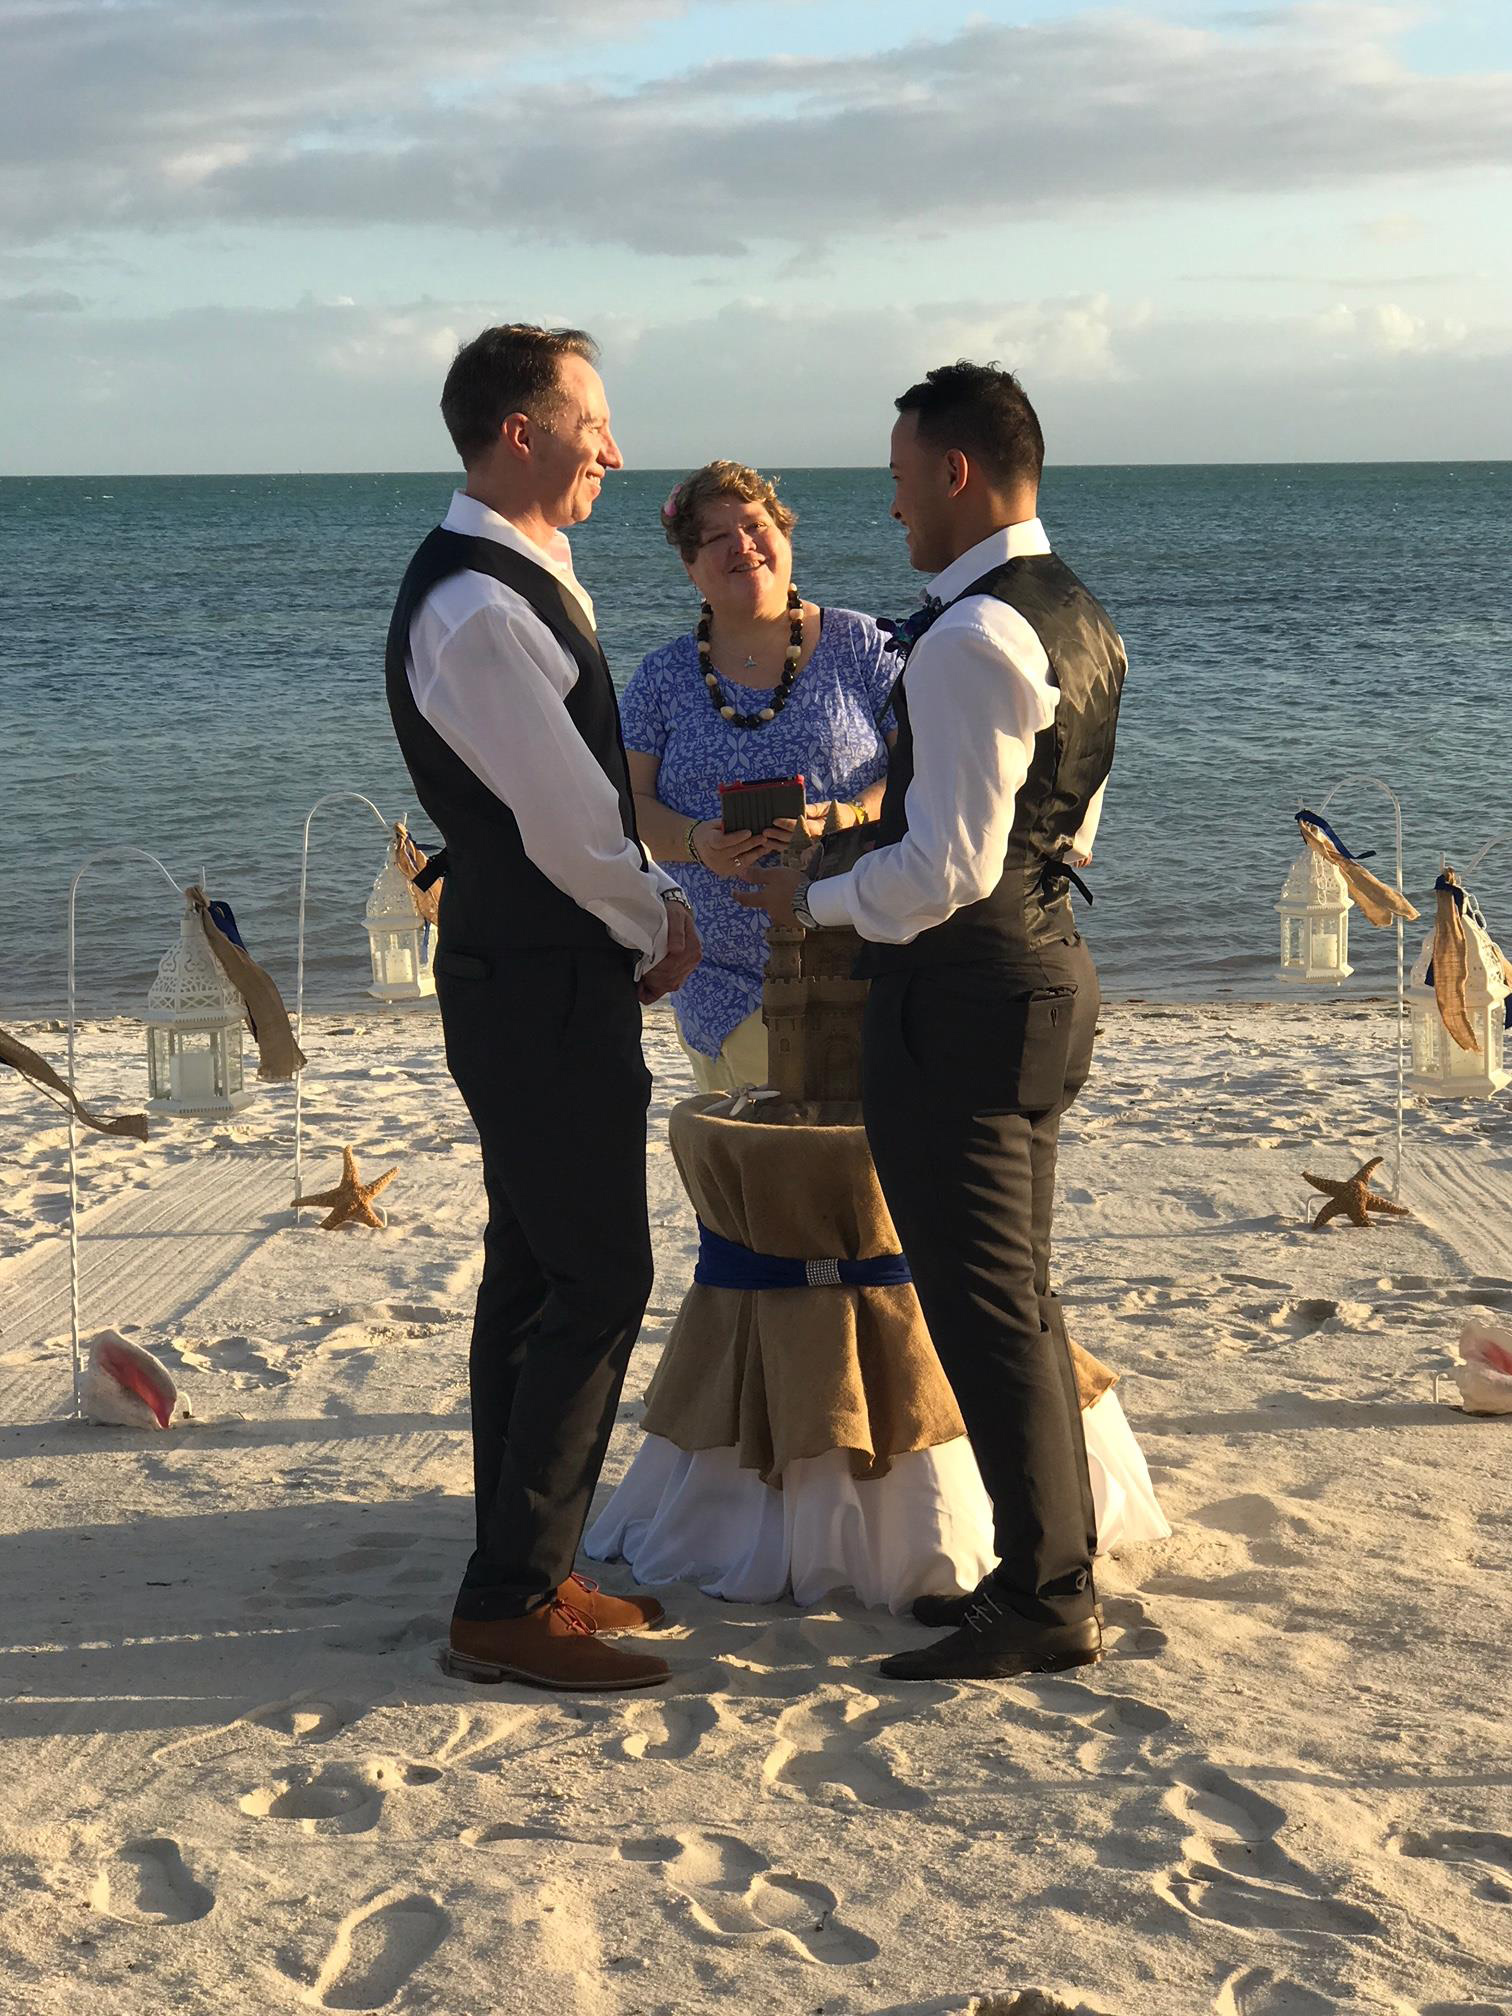 PHOTO: Army Chaplain Tim Brown of Sanford, N.C., left, marries his fiance, Sergio Avila, on the beach in January 2017.